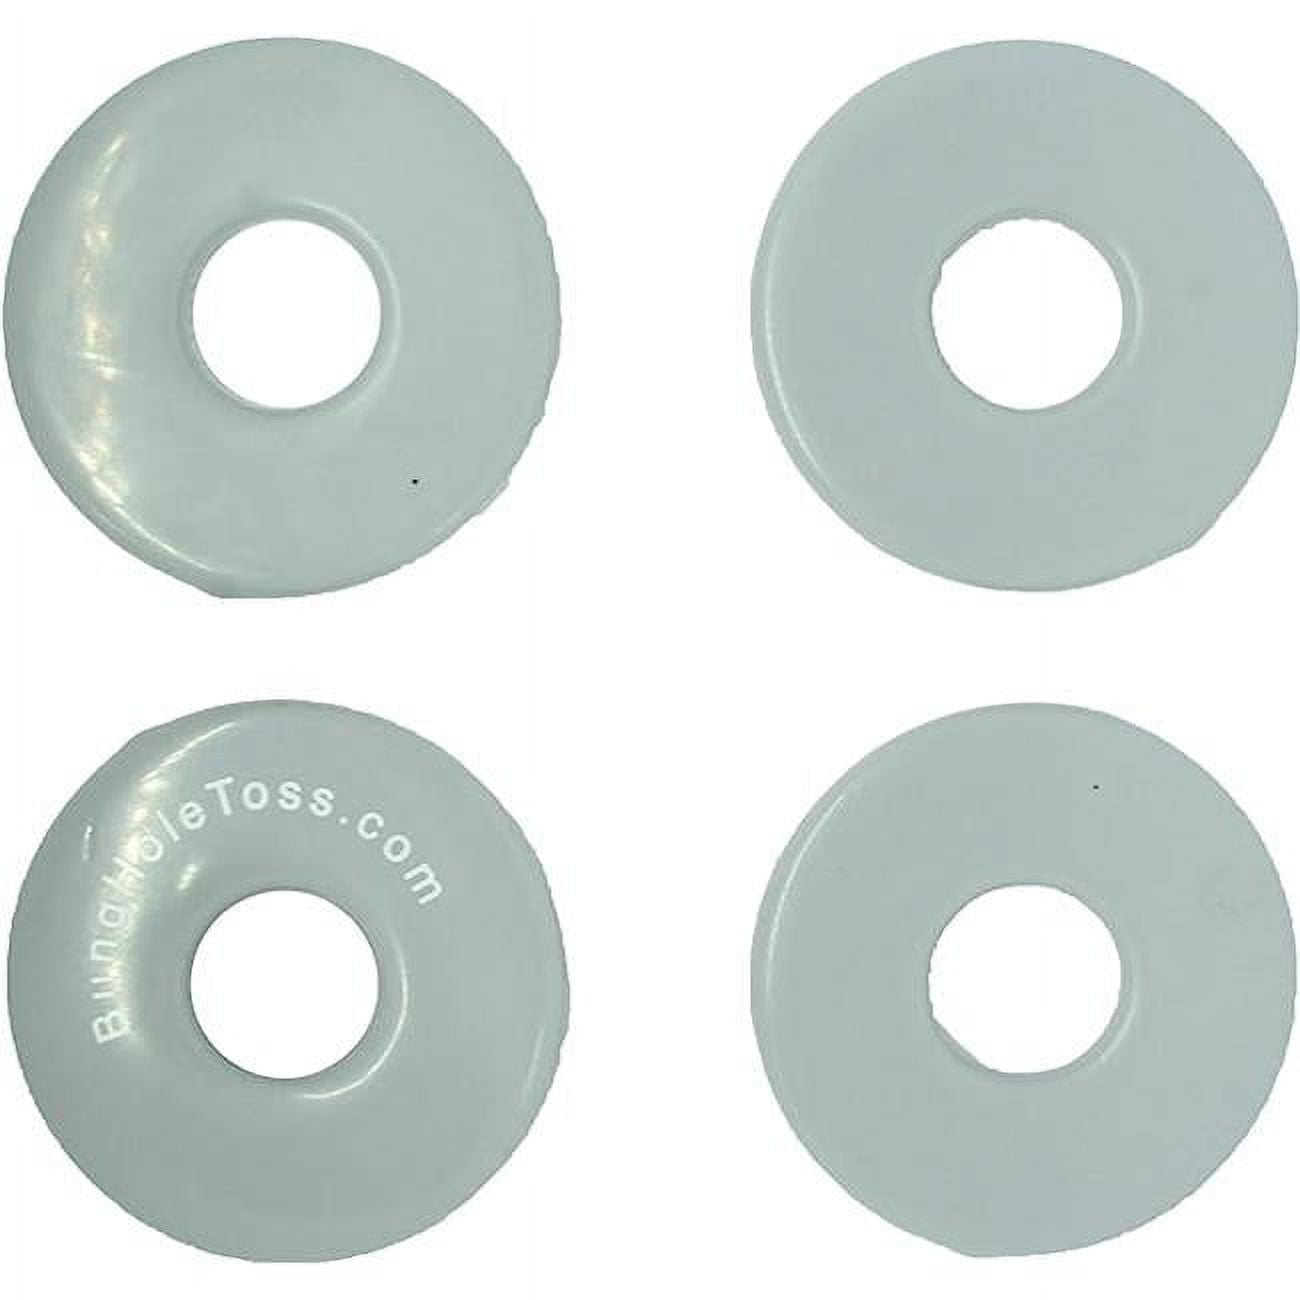 Picture of Bunghole Beach Toss BHRGRY Grey Rings, Set of 4